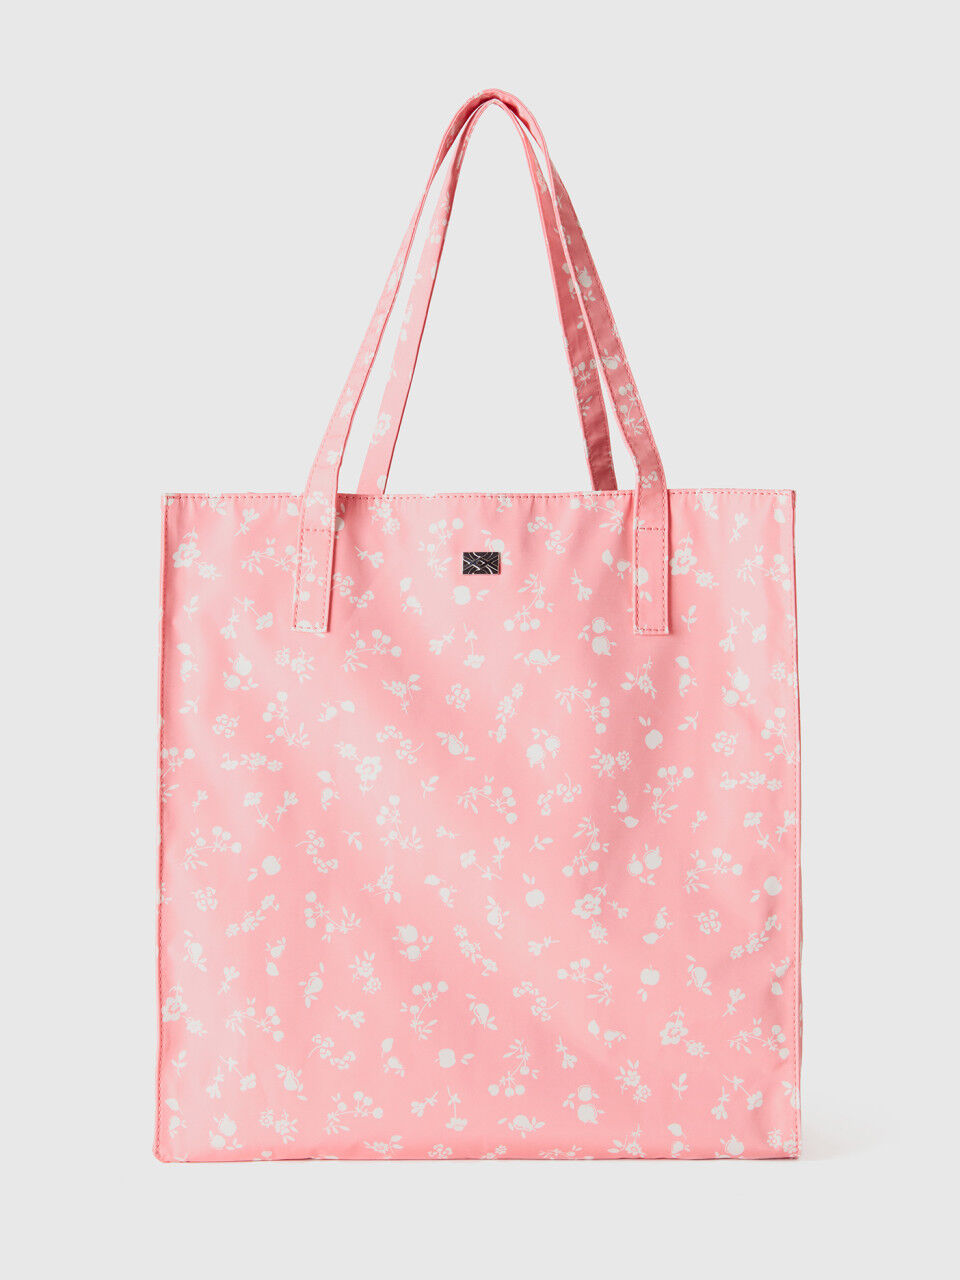 Shopping Bag in Rosa mit Muster